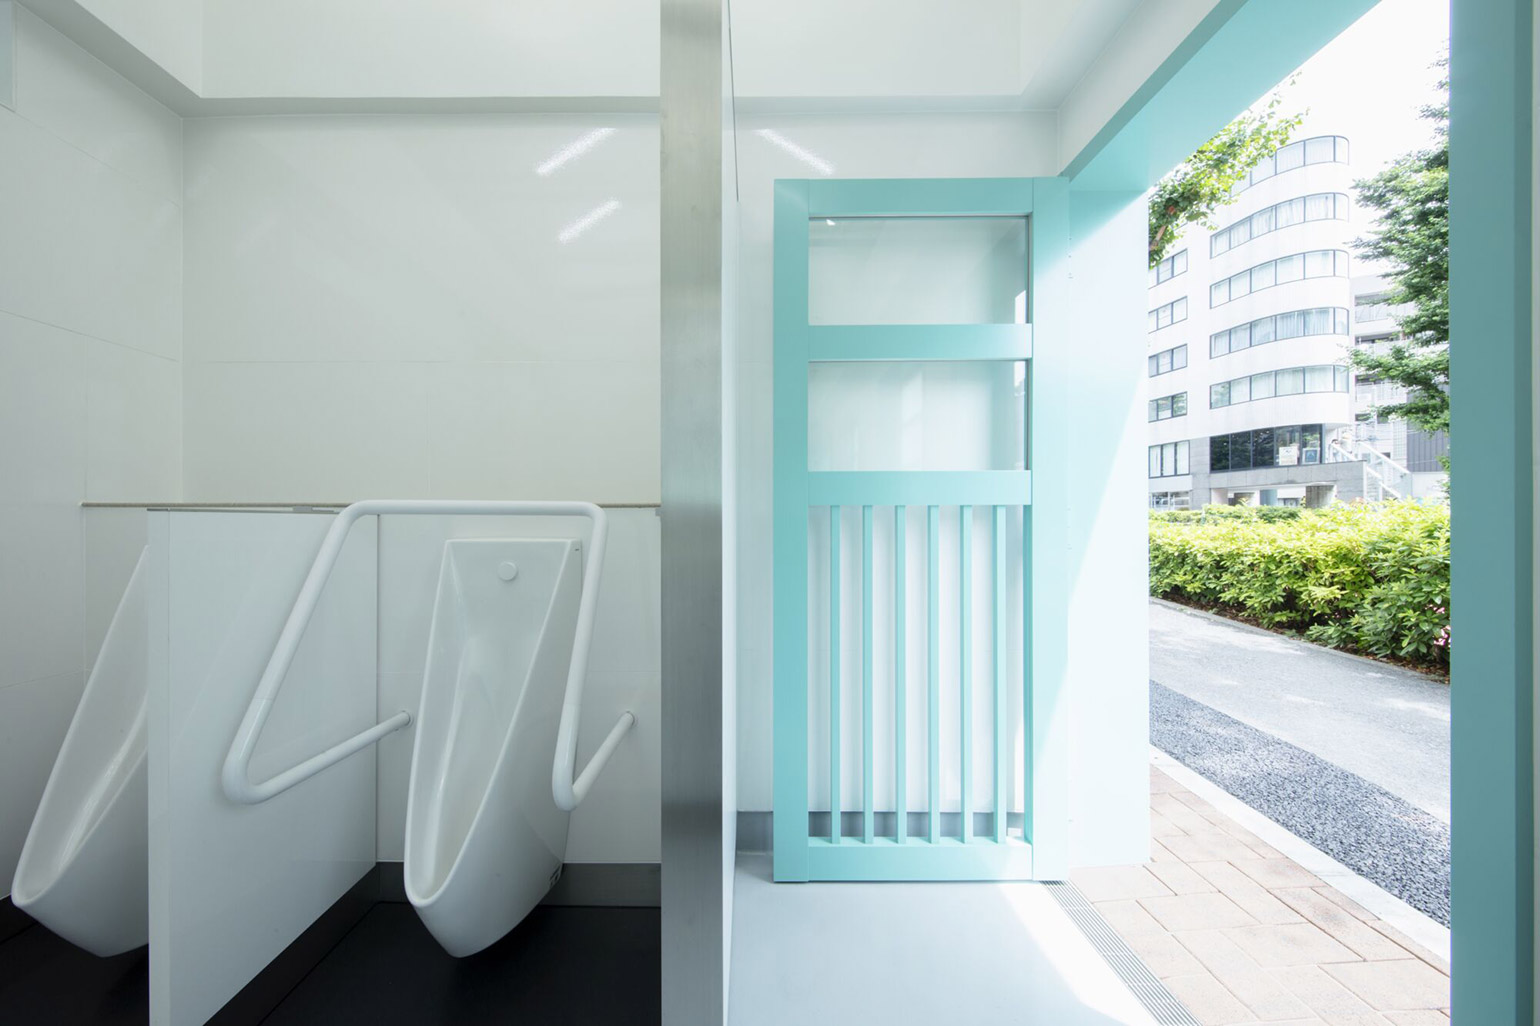 “The House” — NIGO Designed Eighth Public Restroom for The Tokyo Toilet Project